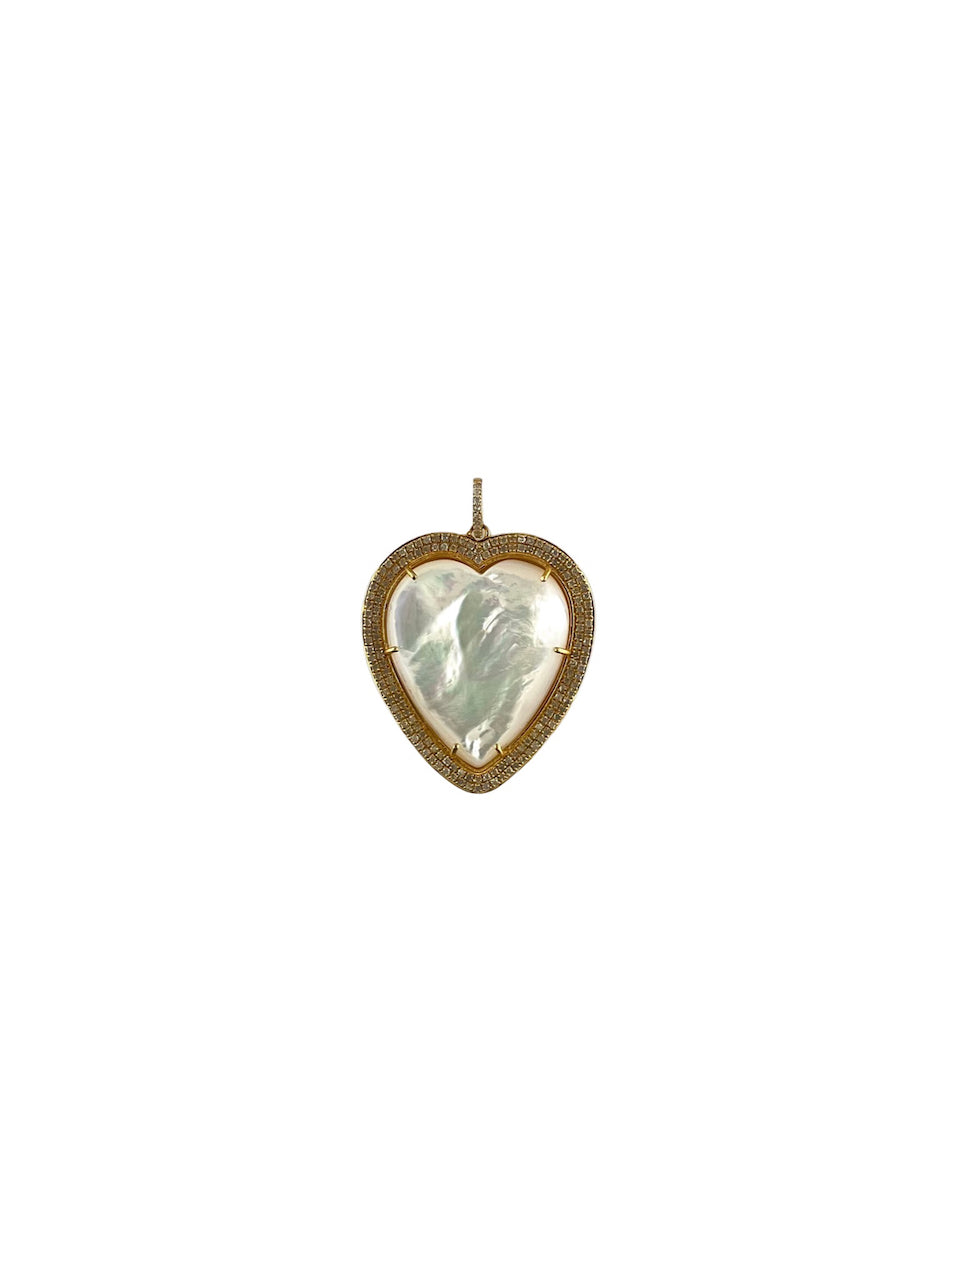 Mother of Pearl Heart with Double Row Pave Diamonds set in 22kt Gold over Brass